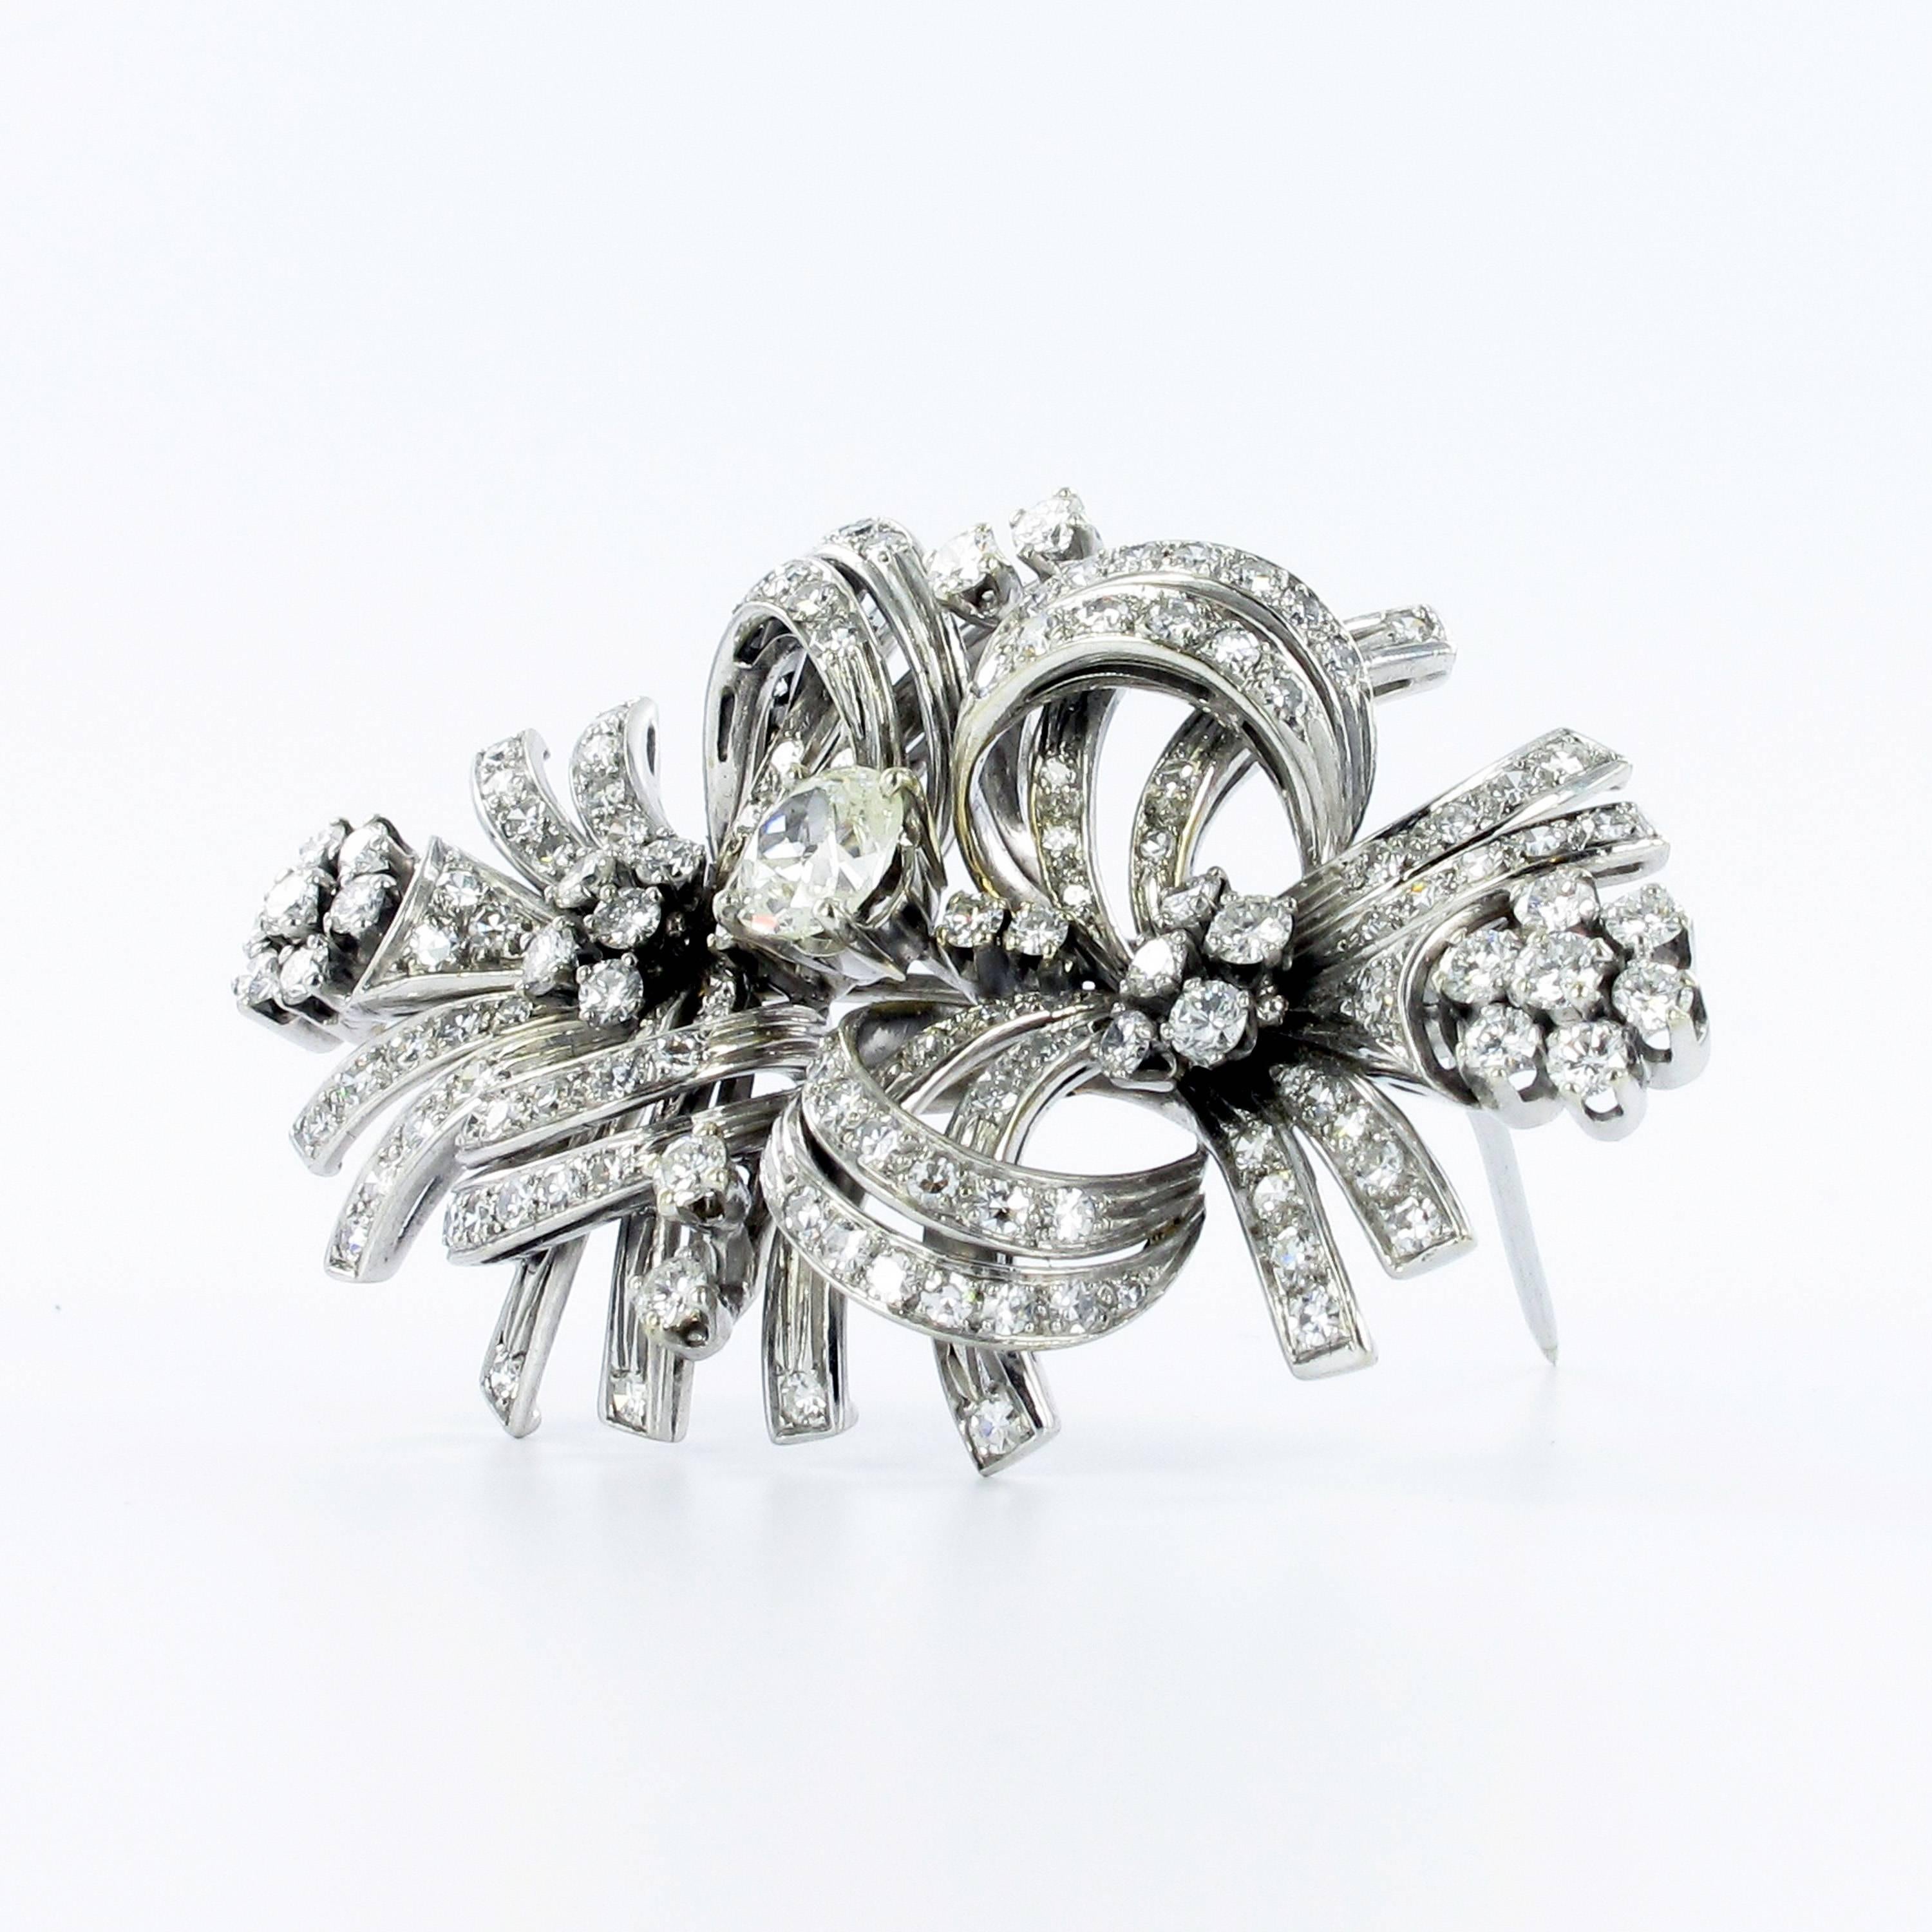 This classic brooch is crafted in 18k white gold. Prong and pave-set with 154 brilliant and single cut diamonds with G/H colour and vs clarity. Total weight approximately 2.50 carats. Centered around an old cut cushion shape diamond of approximately